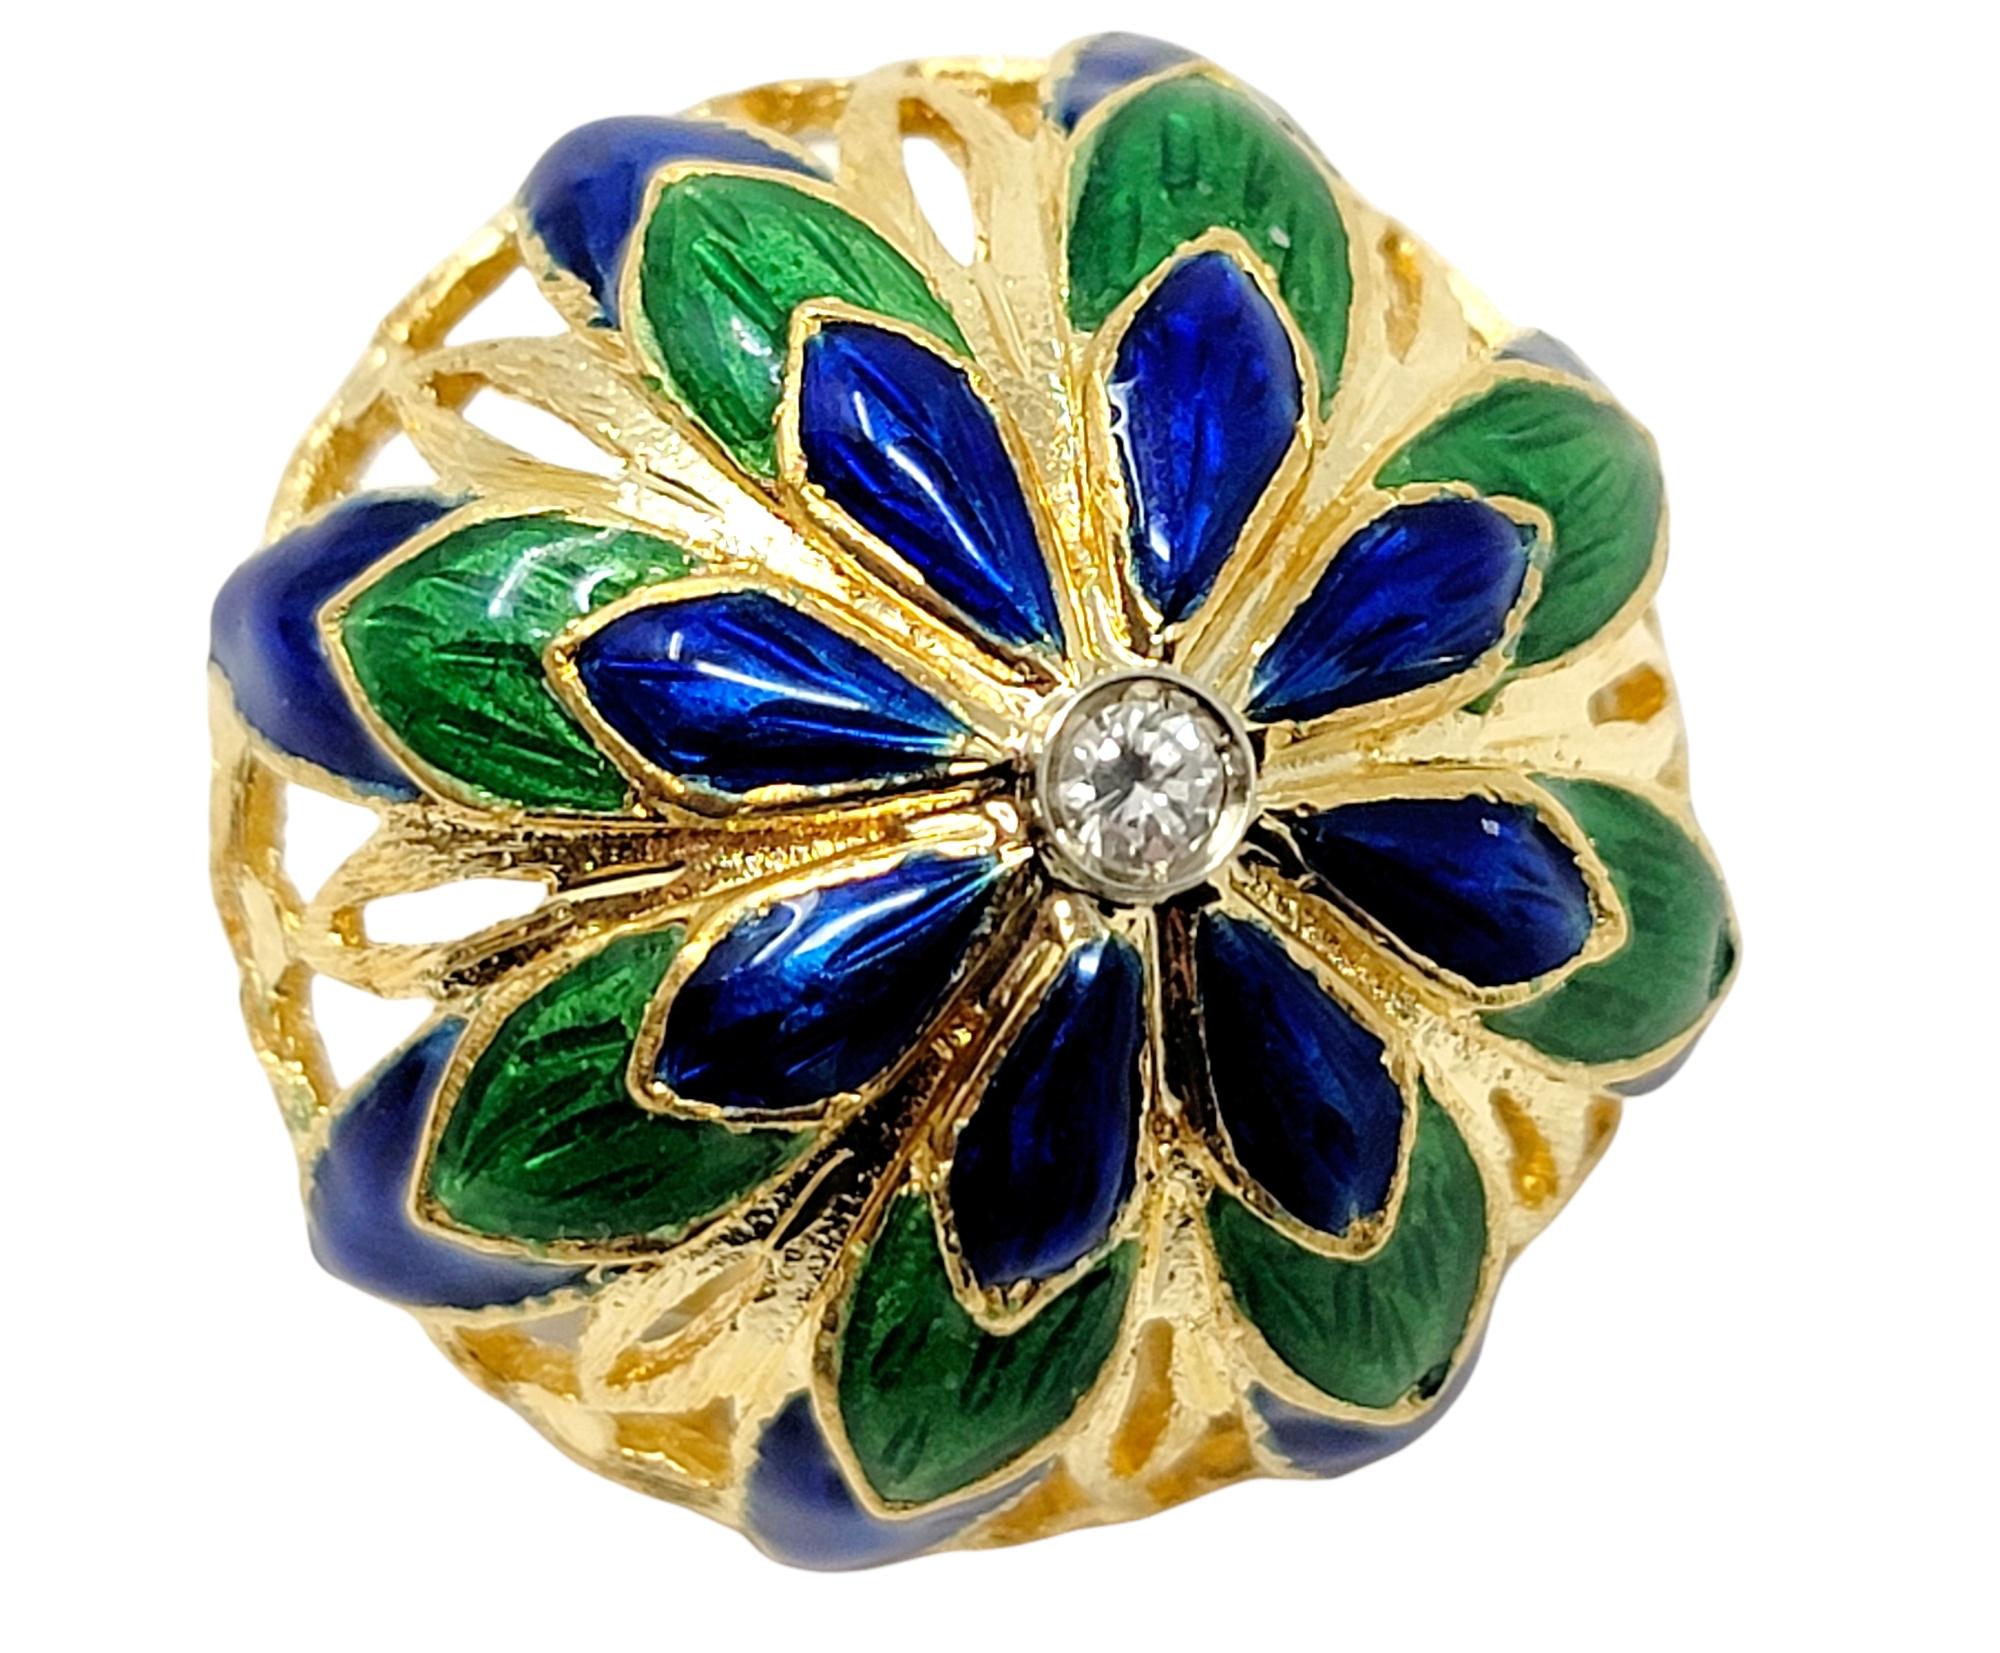 These vibrant floral domed earrings are absolutely incredible! Bold in both size and design, these colorful beauties feature bright blue and green enamel petals accented by a single sparkling diamond and set in 14 karat gold. Made for any ear, these